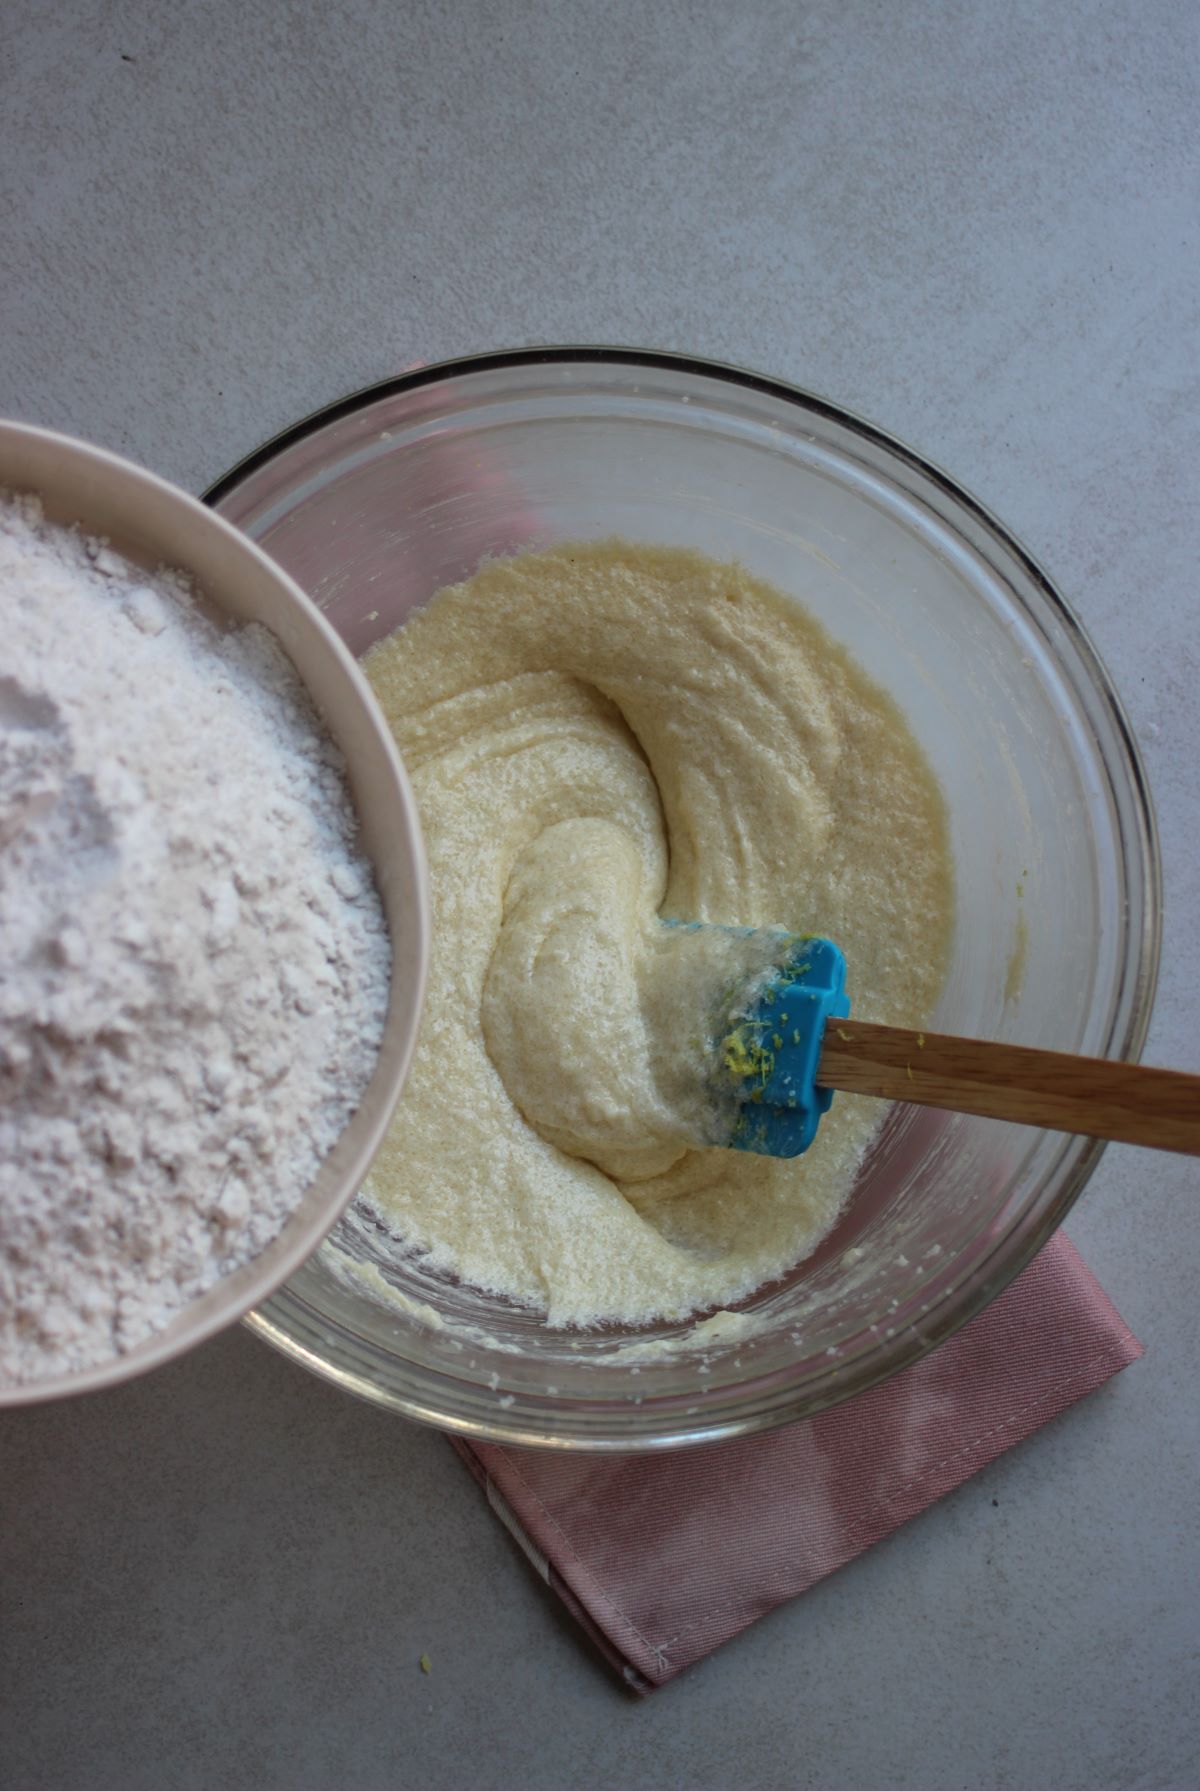 Plate with flour about to be poured in a glass bowl with a mixture.